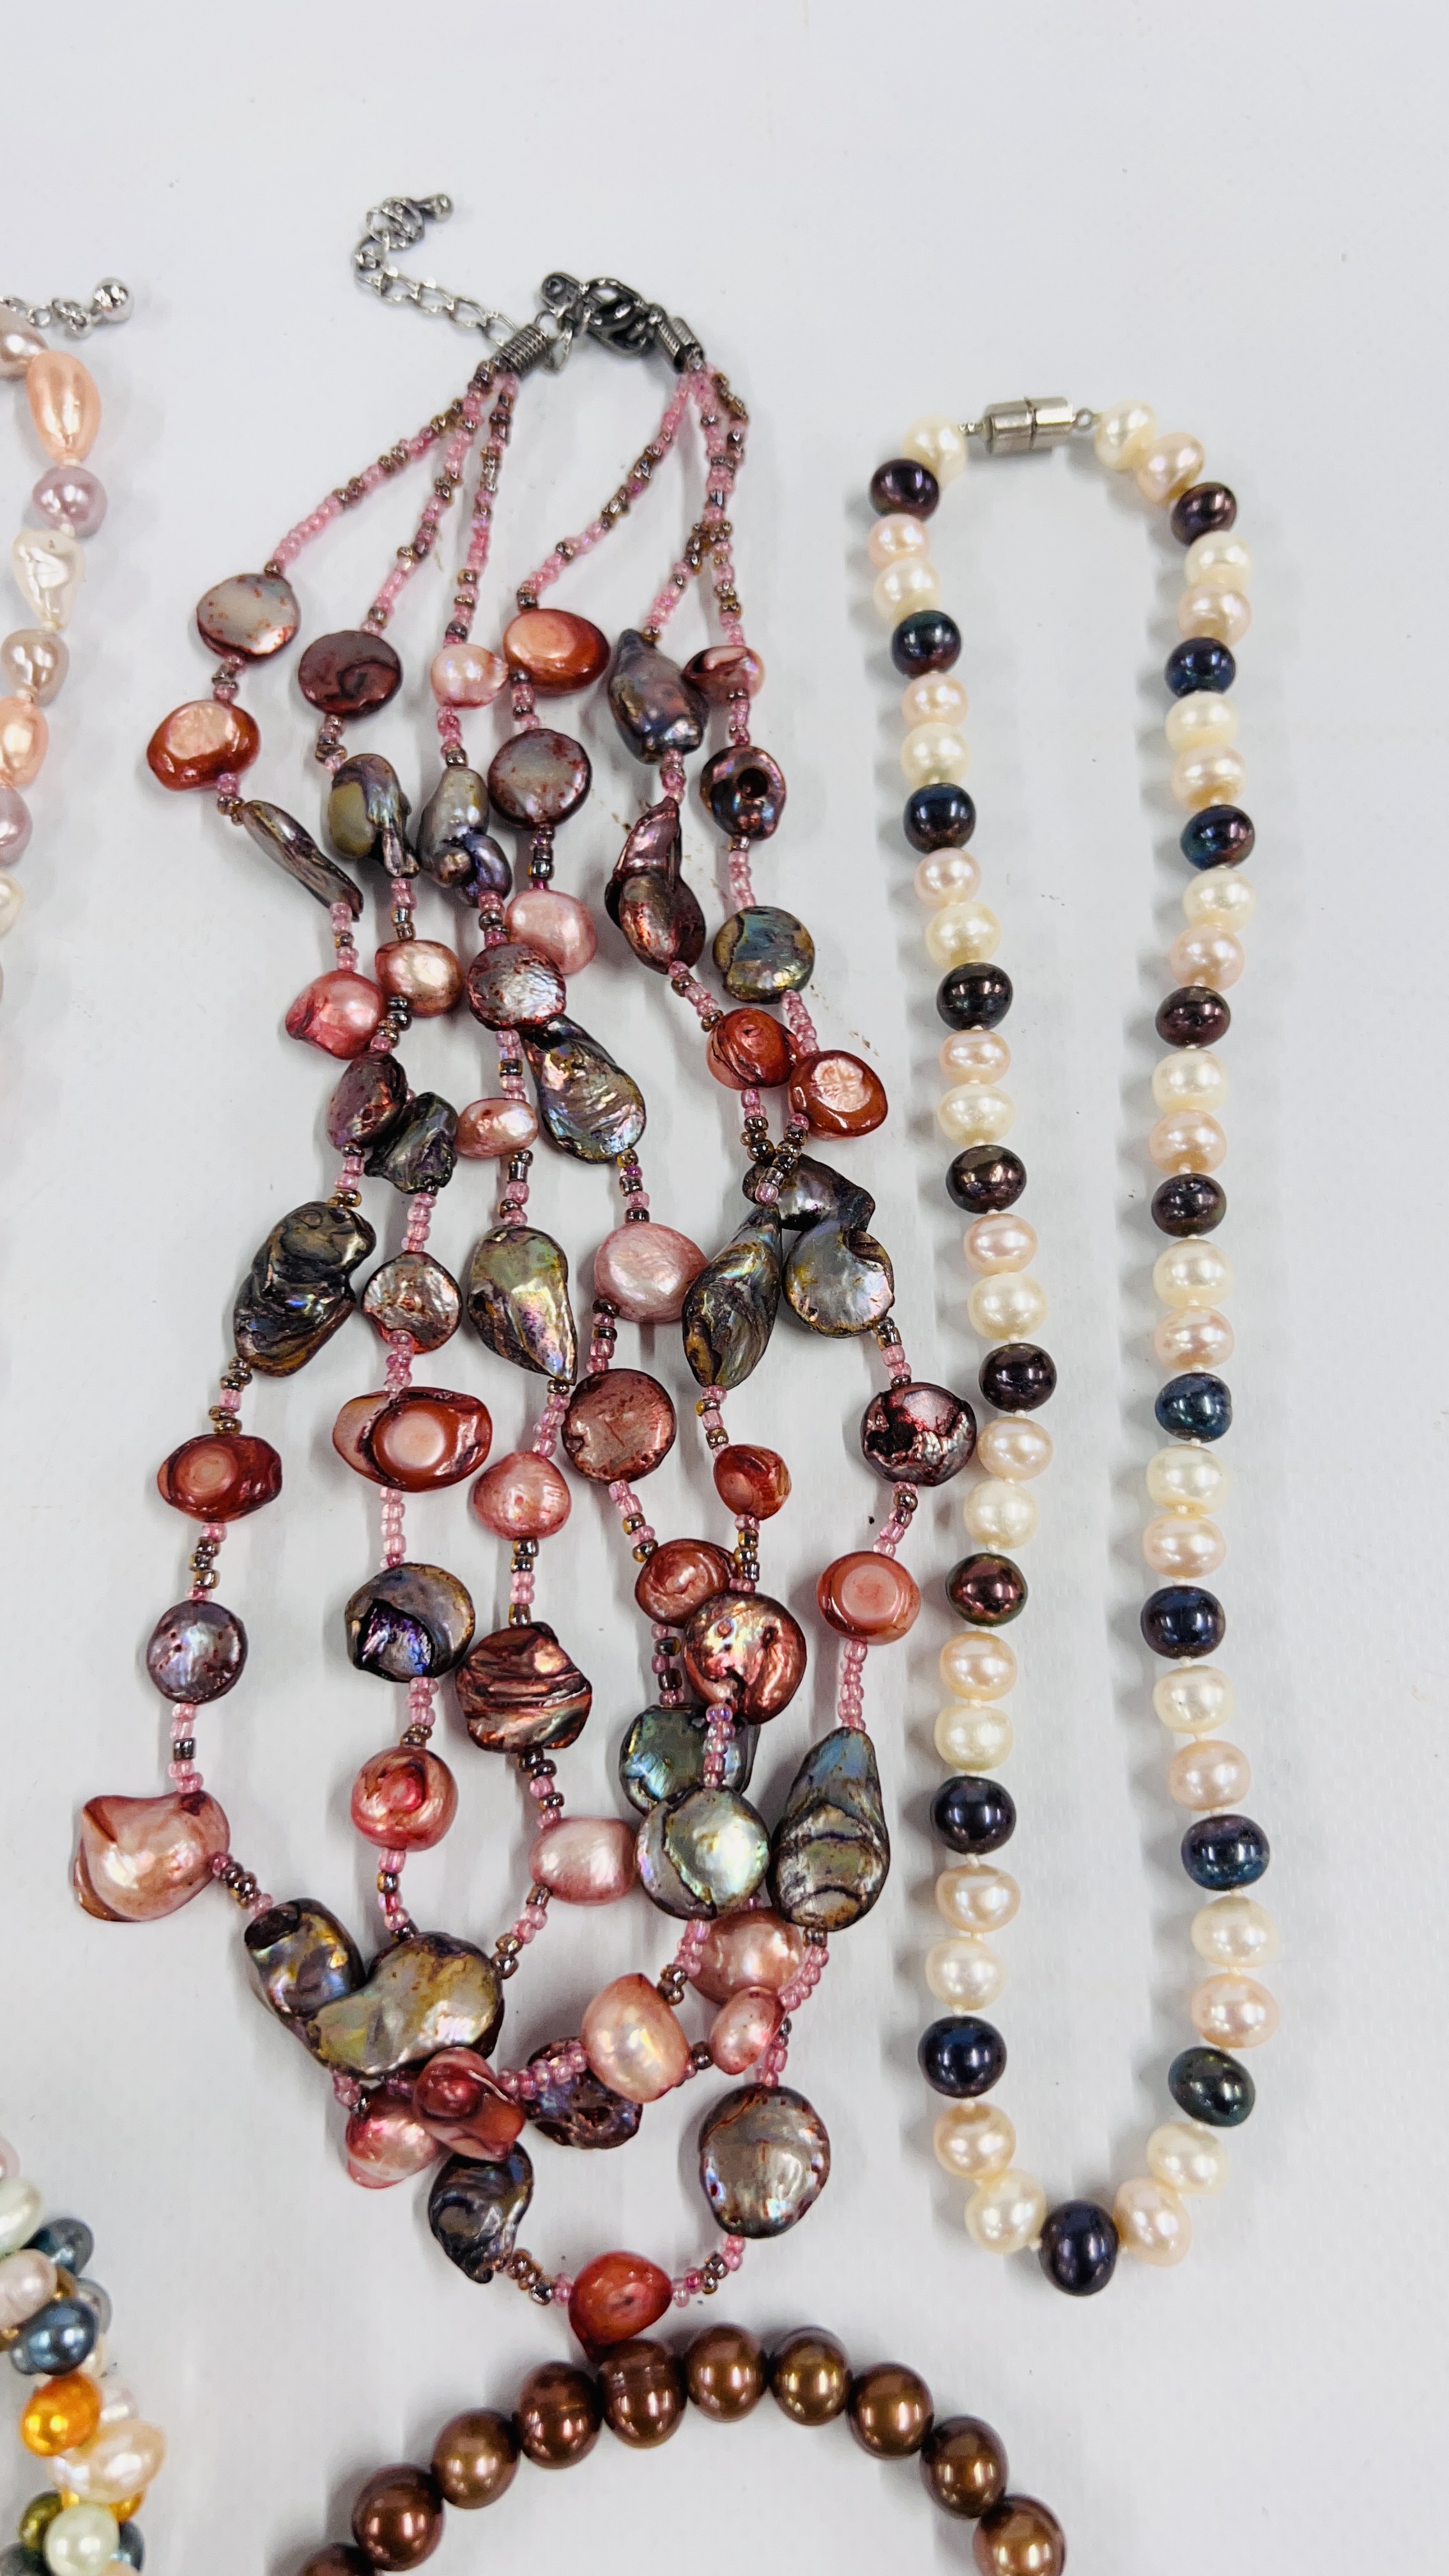 SELECTION OF CULTIVATED PEARL NECKLACES. - Image 3 of 4